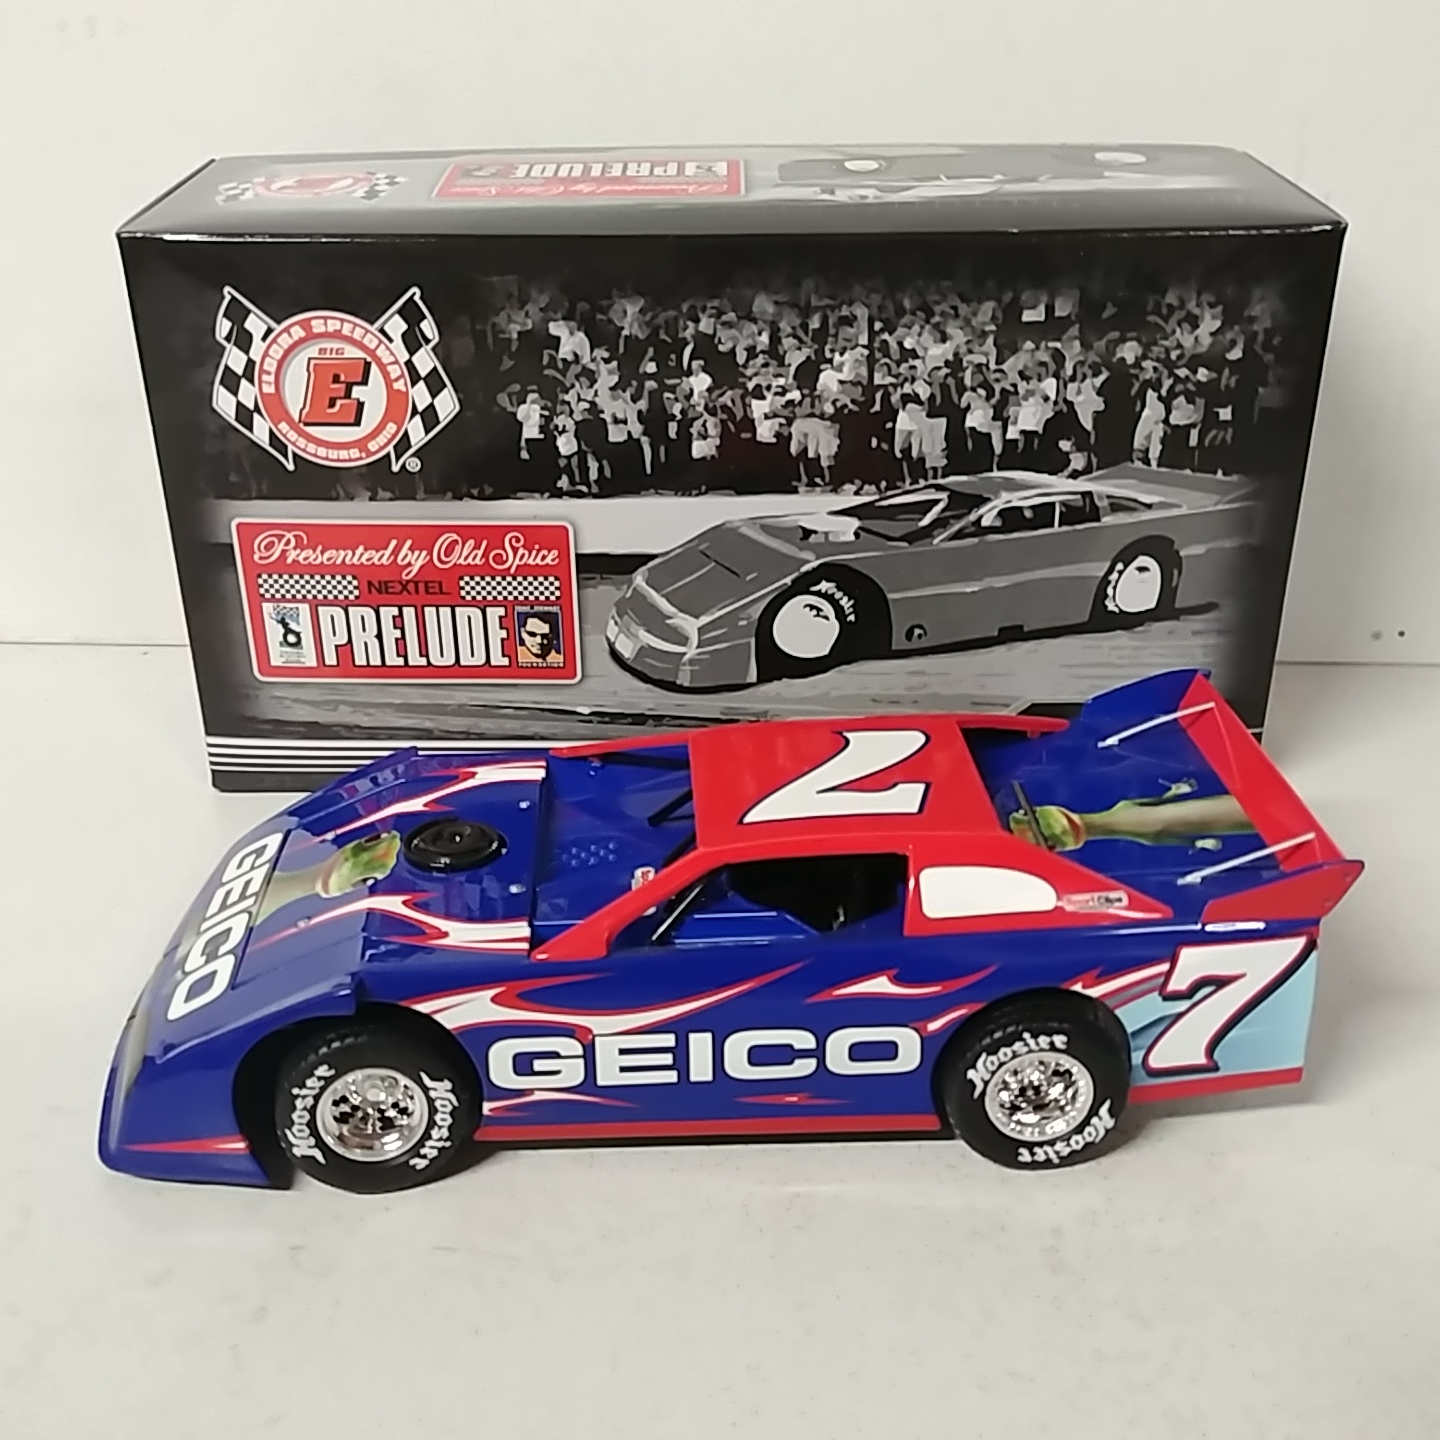 2007 Mike Wallace 1/24th Geico "Dirt Late Model" Monte Carlo SS